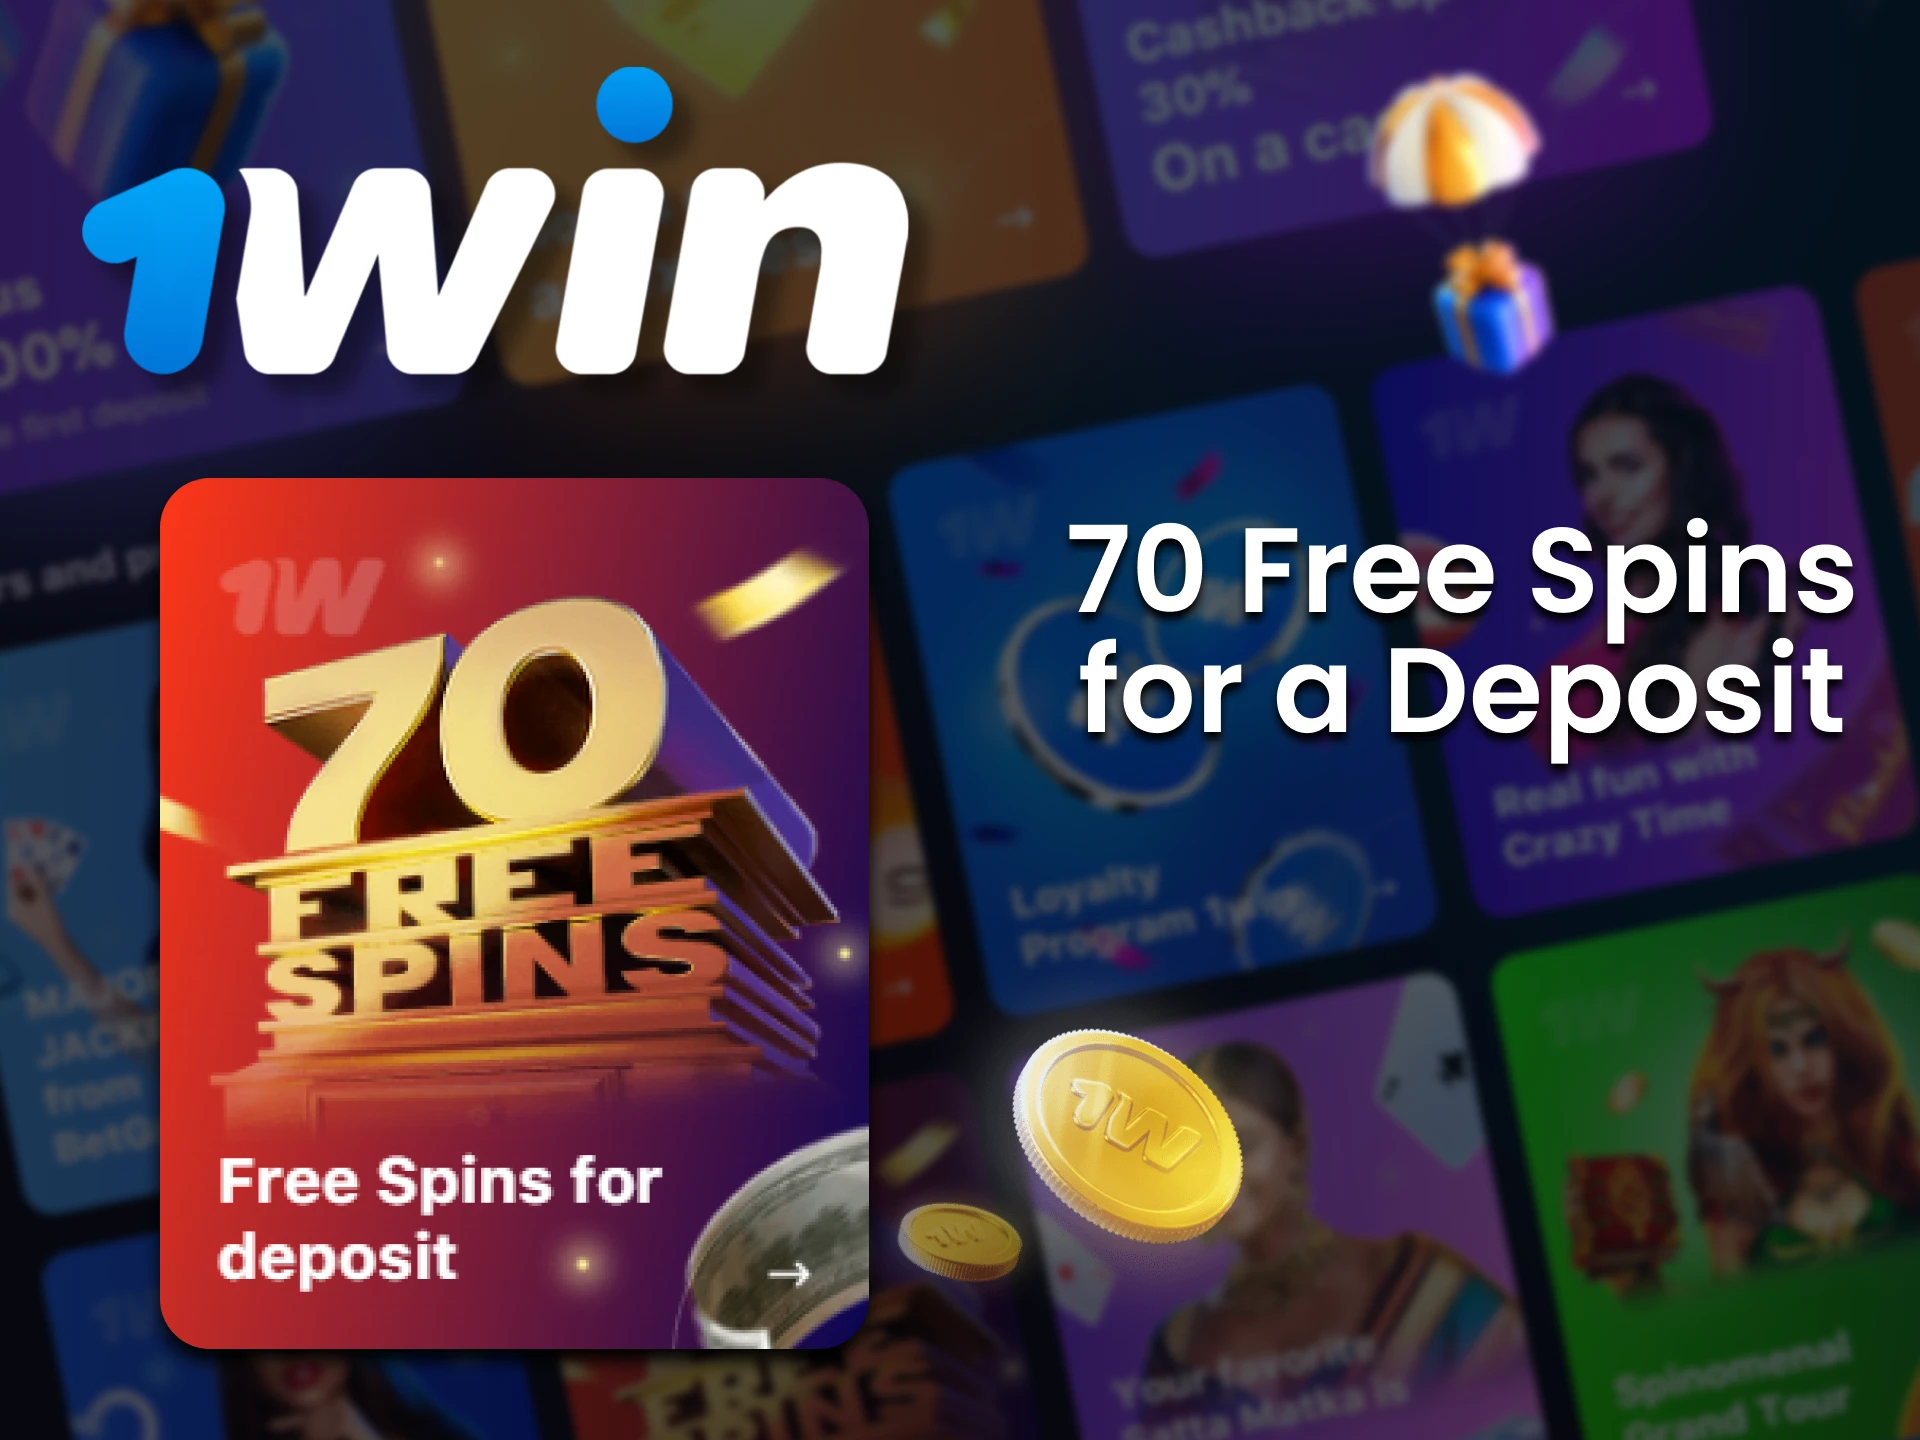 1win gives free spins when you make a deposit.